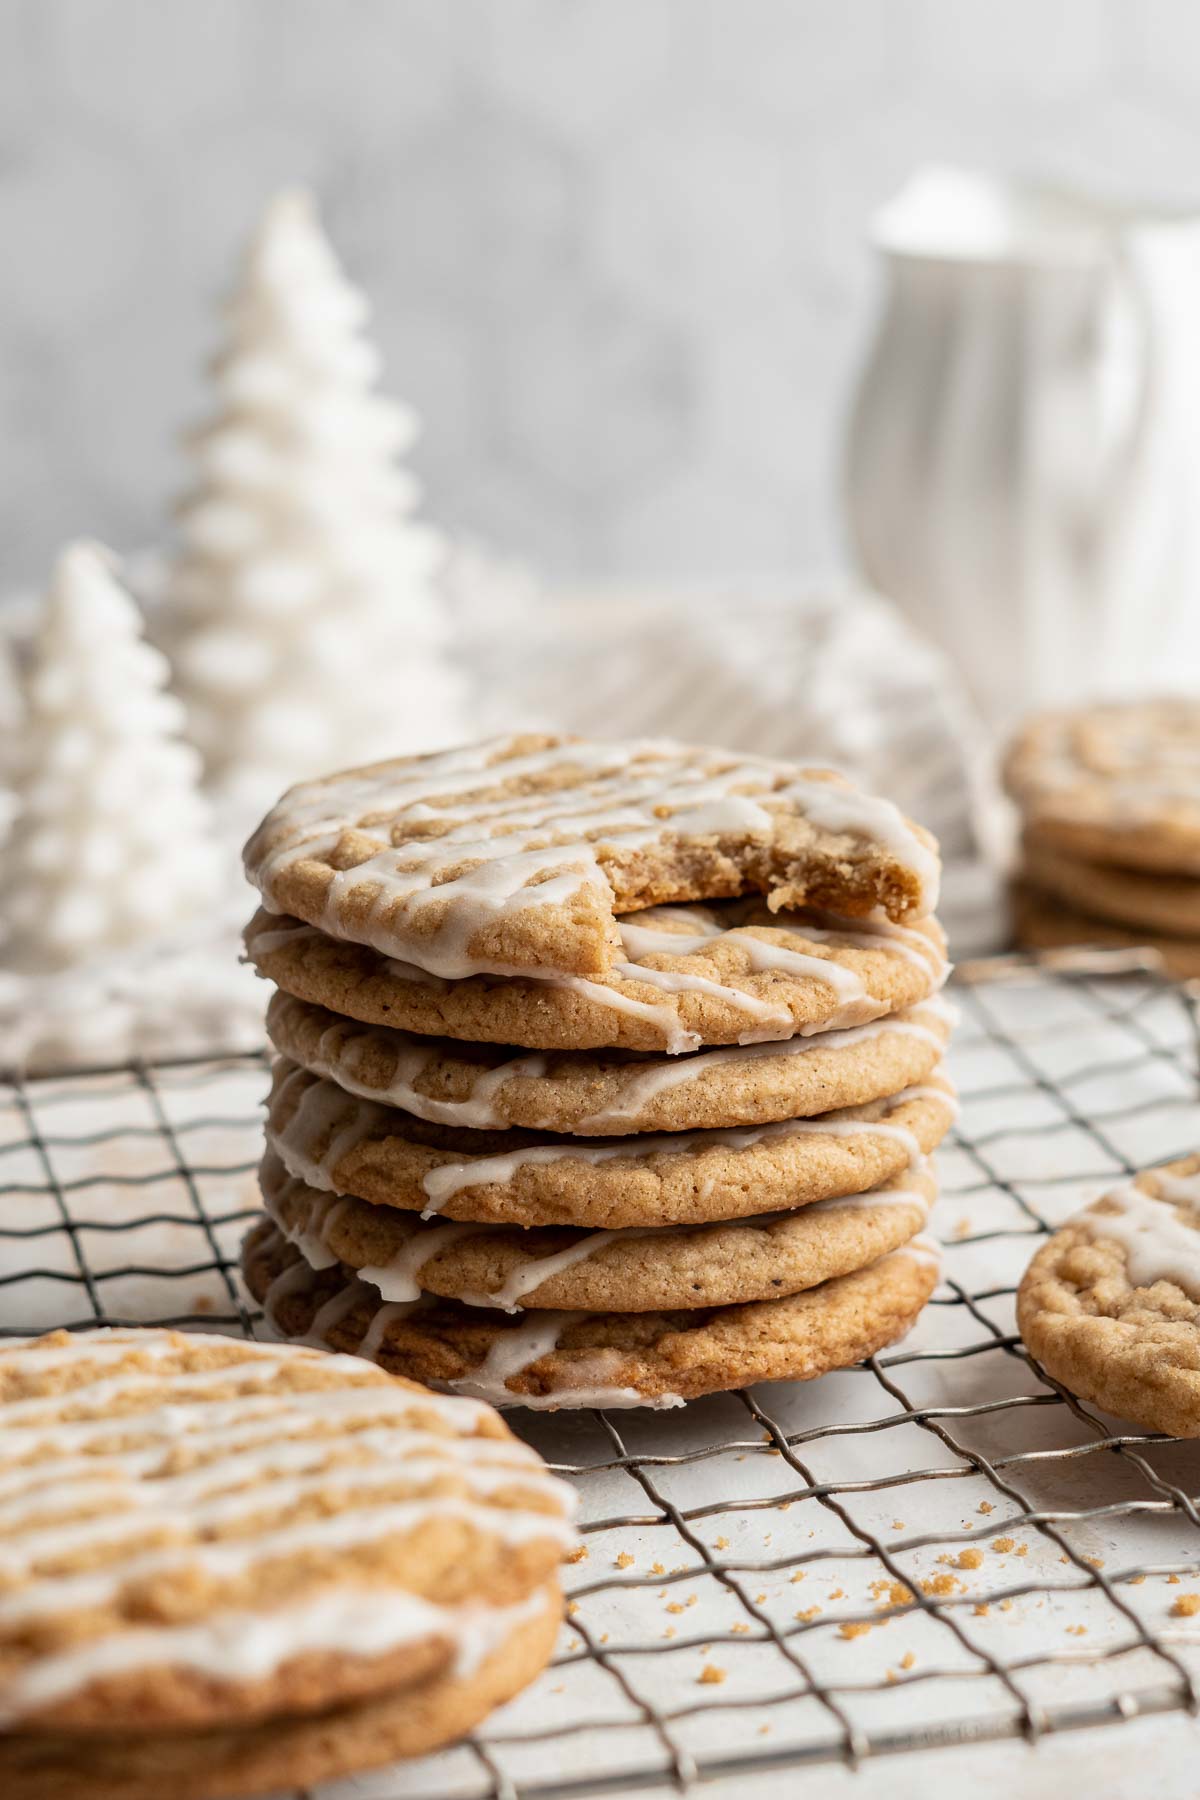 Eggnog cookies are a delicious soft and chewy holiday cookie with a crackly top. They are made with eggnog, spiced warmly, and drizzled with eggnog glaze. | aheadofthyme.com